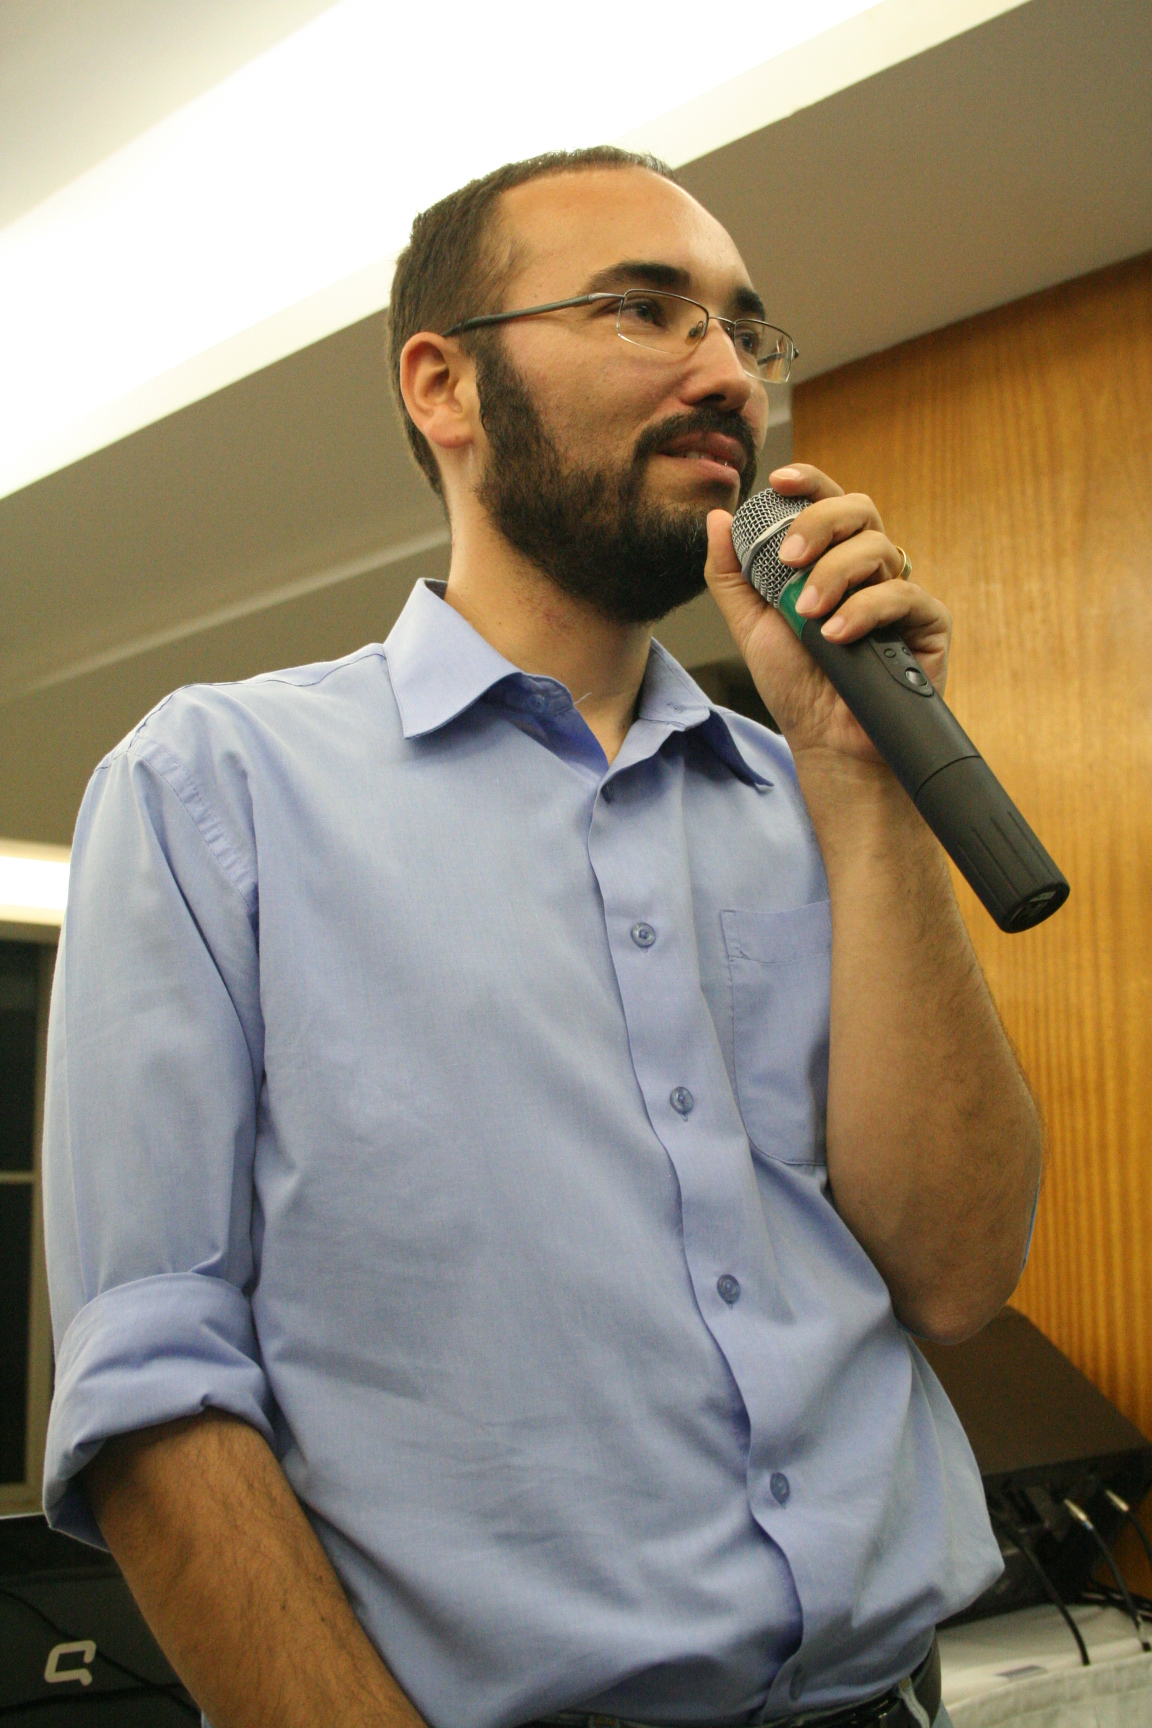 man wearing glasses holding a microphone looking away